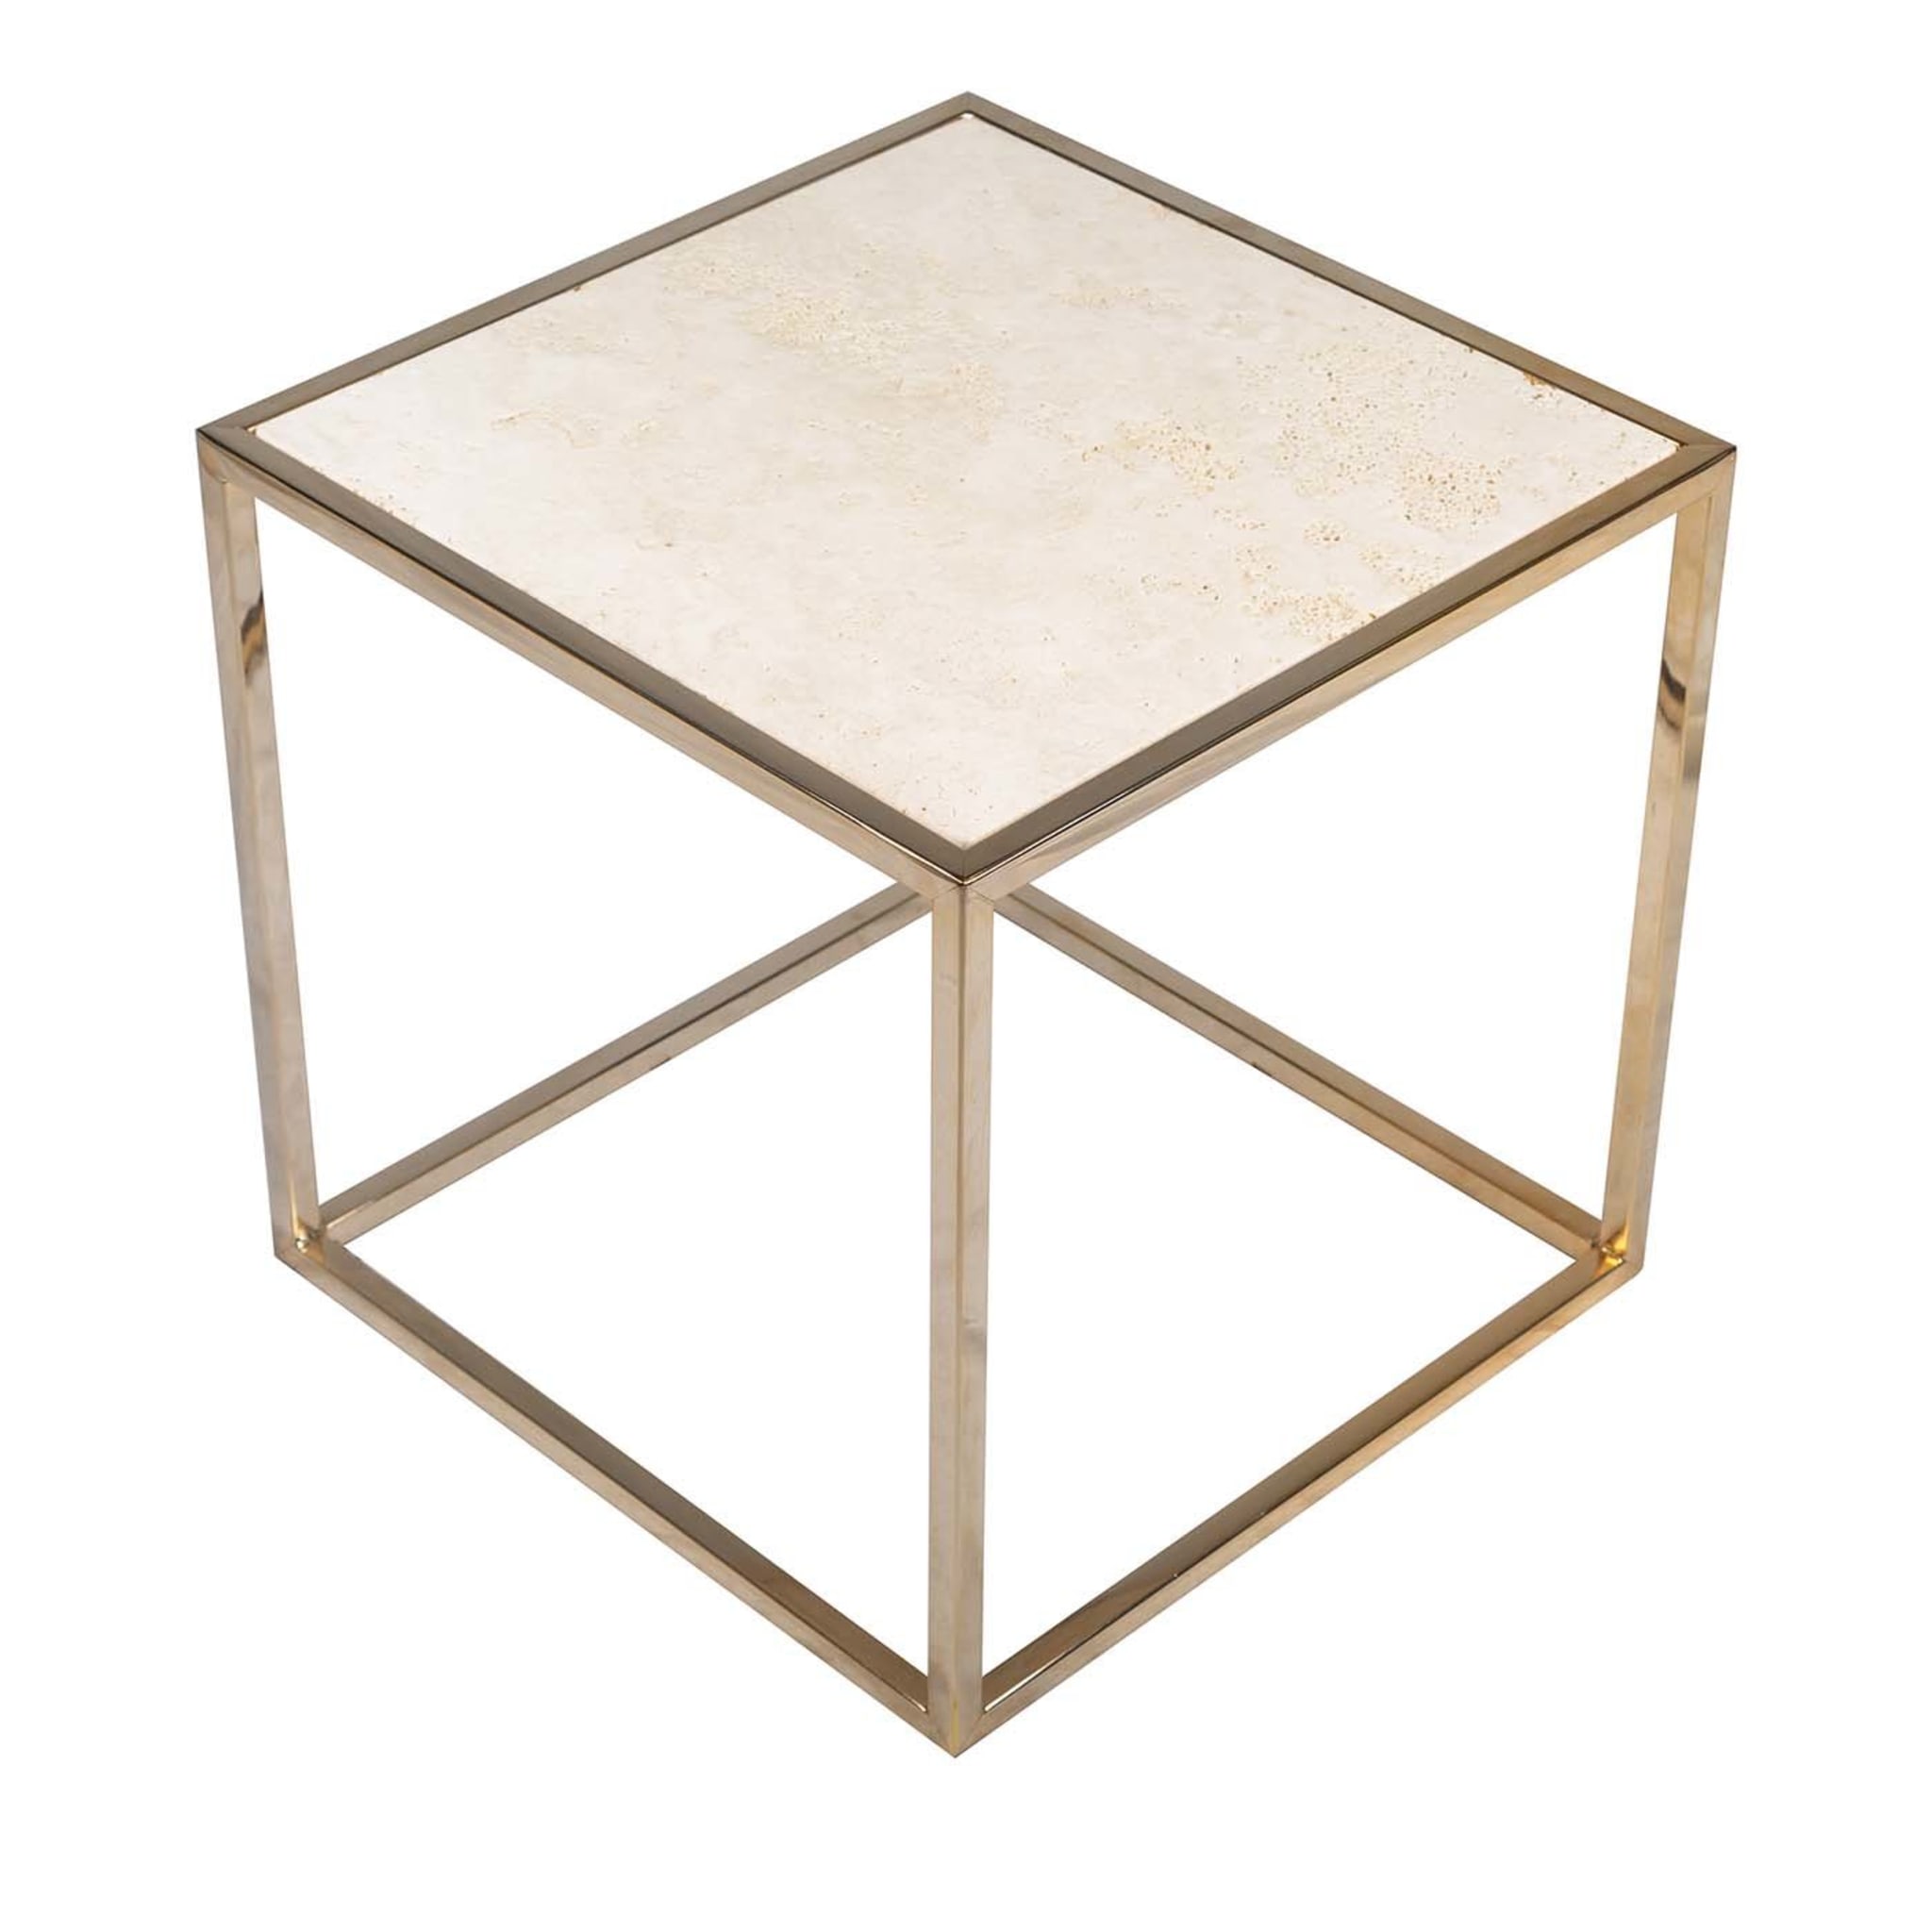 Cube side table with gold finish - Main view